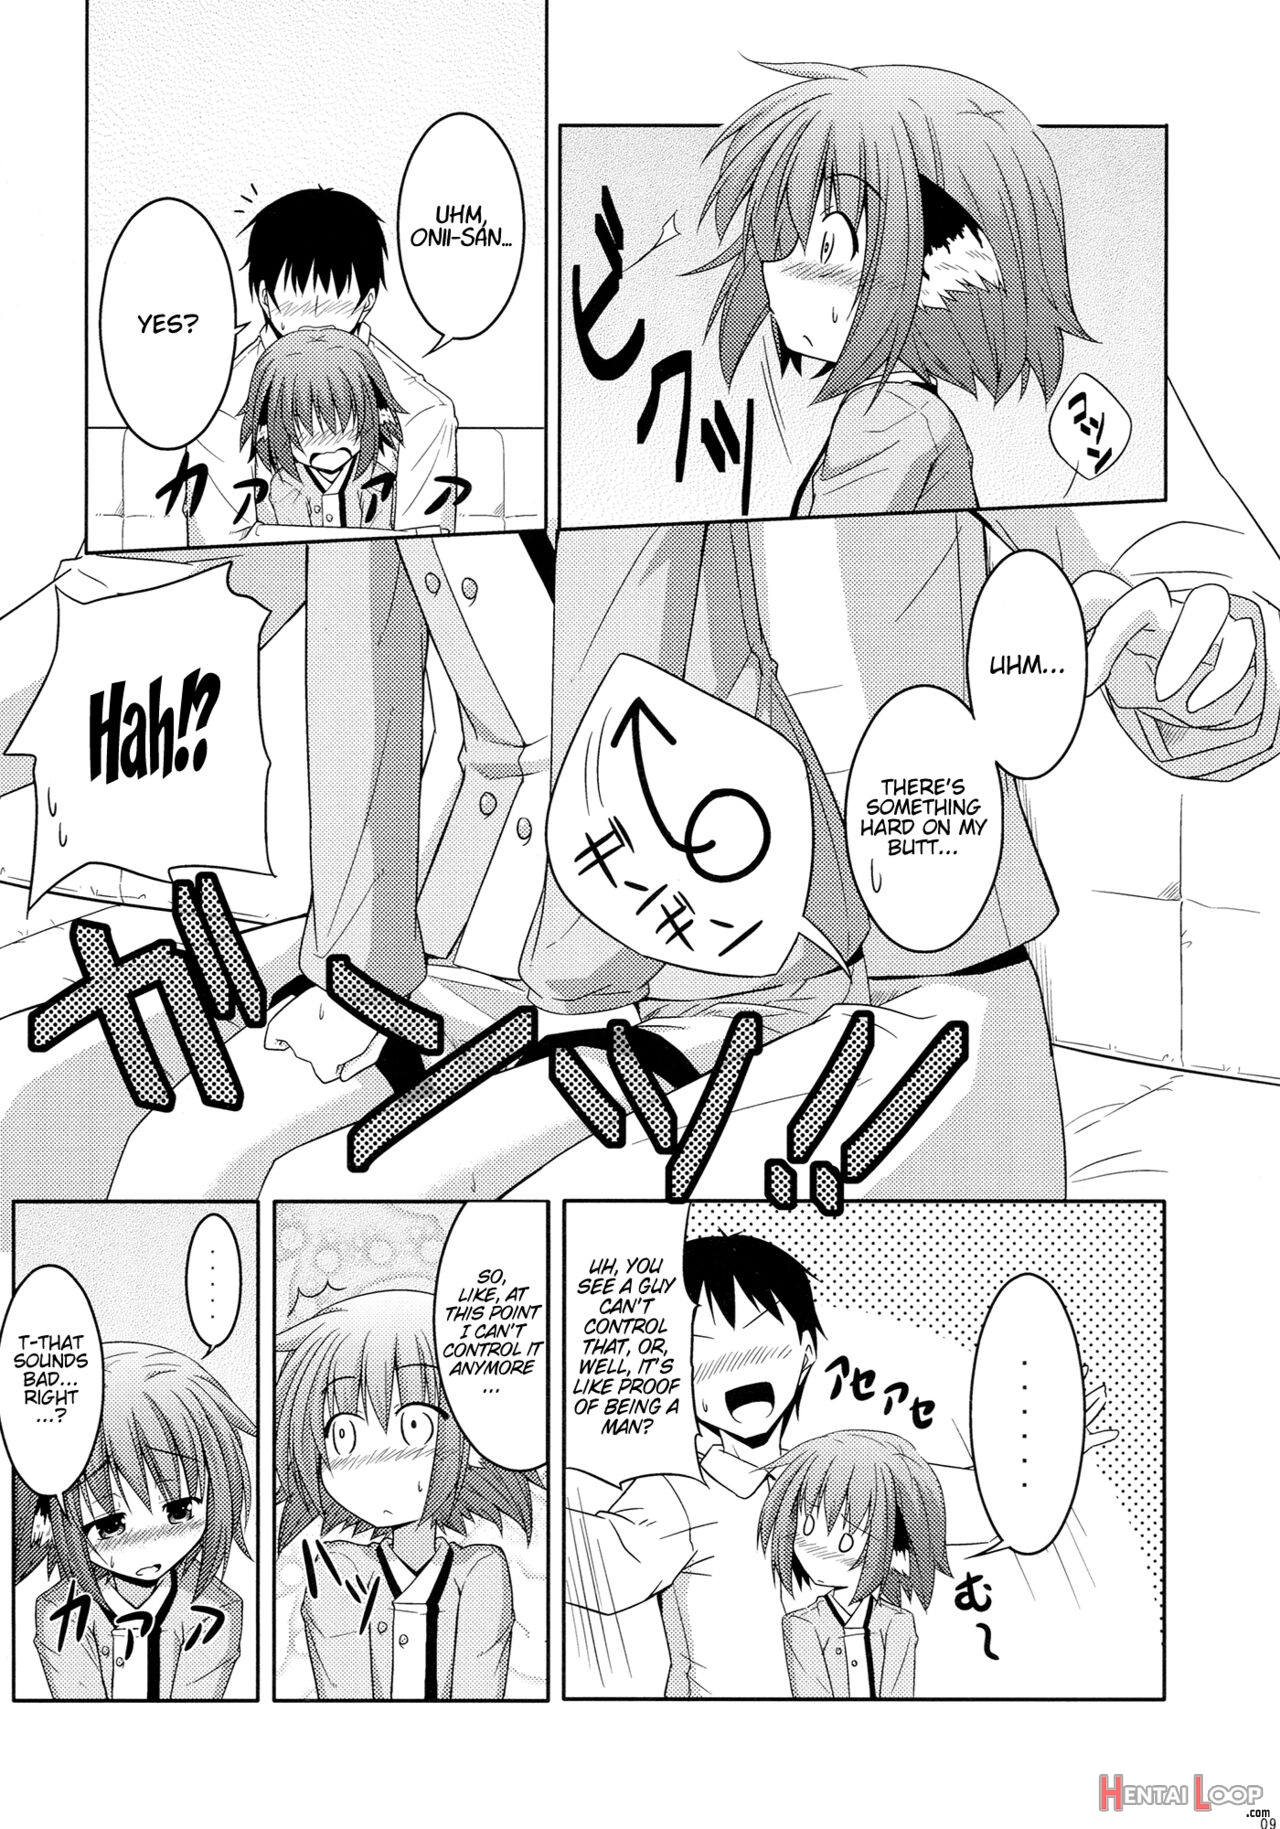 Kyouko's Daily Life page 8